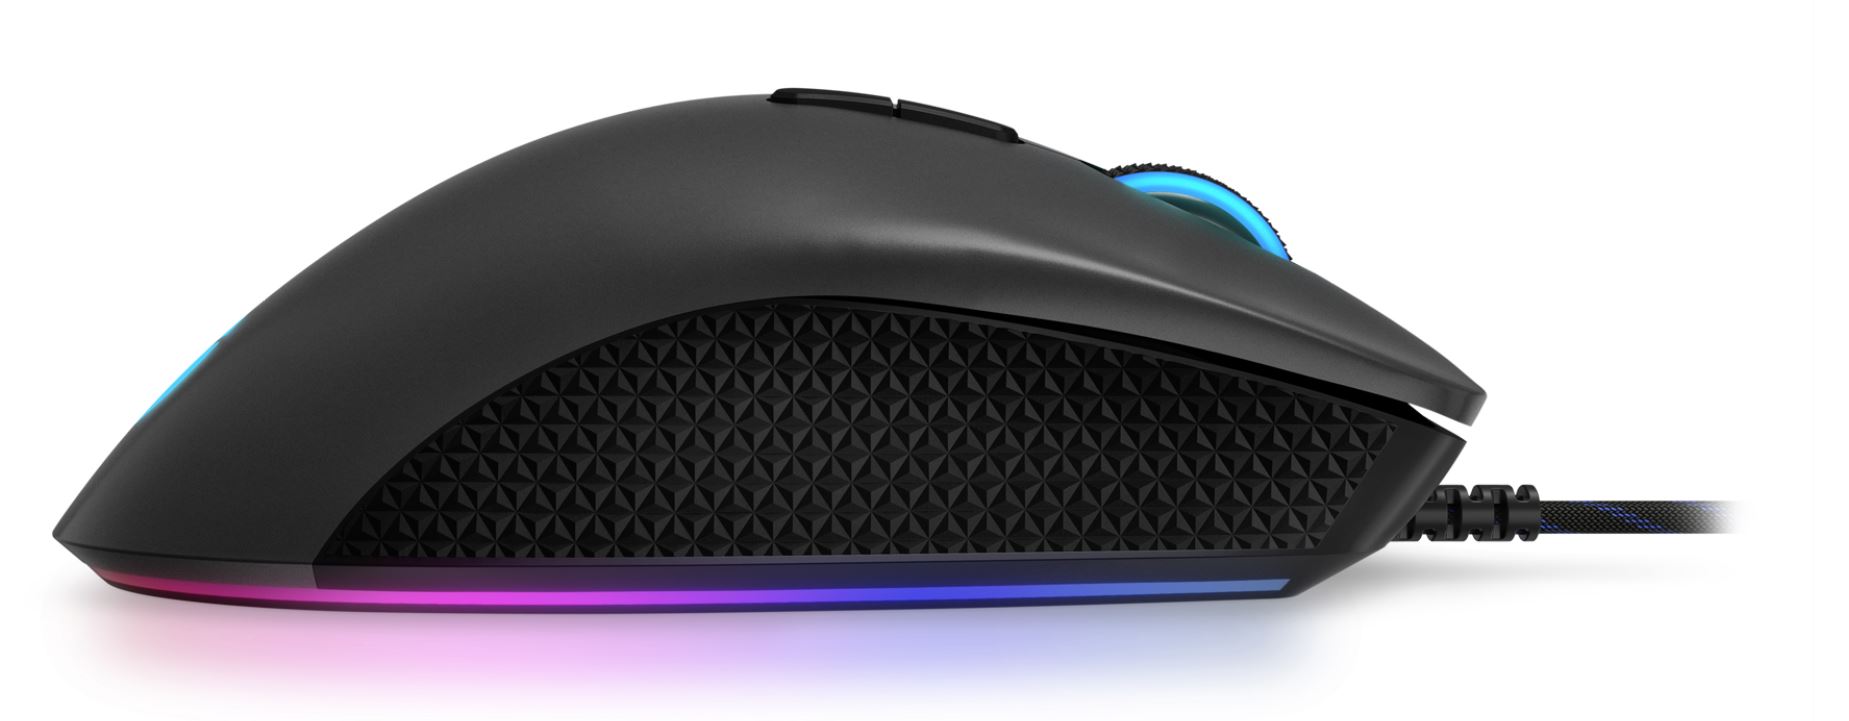 Lenovo Legion M500 RGB Gaming Mouse - Overview and Service Parts 